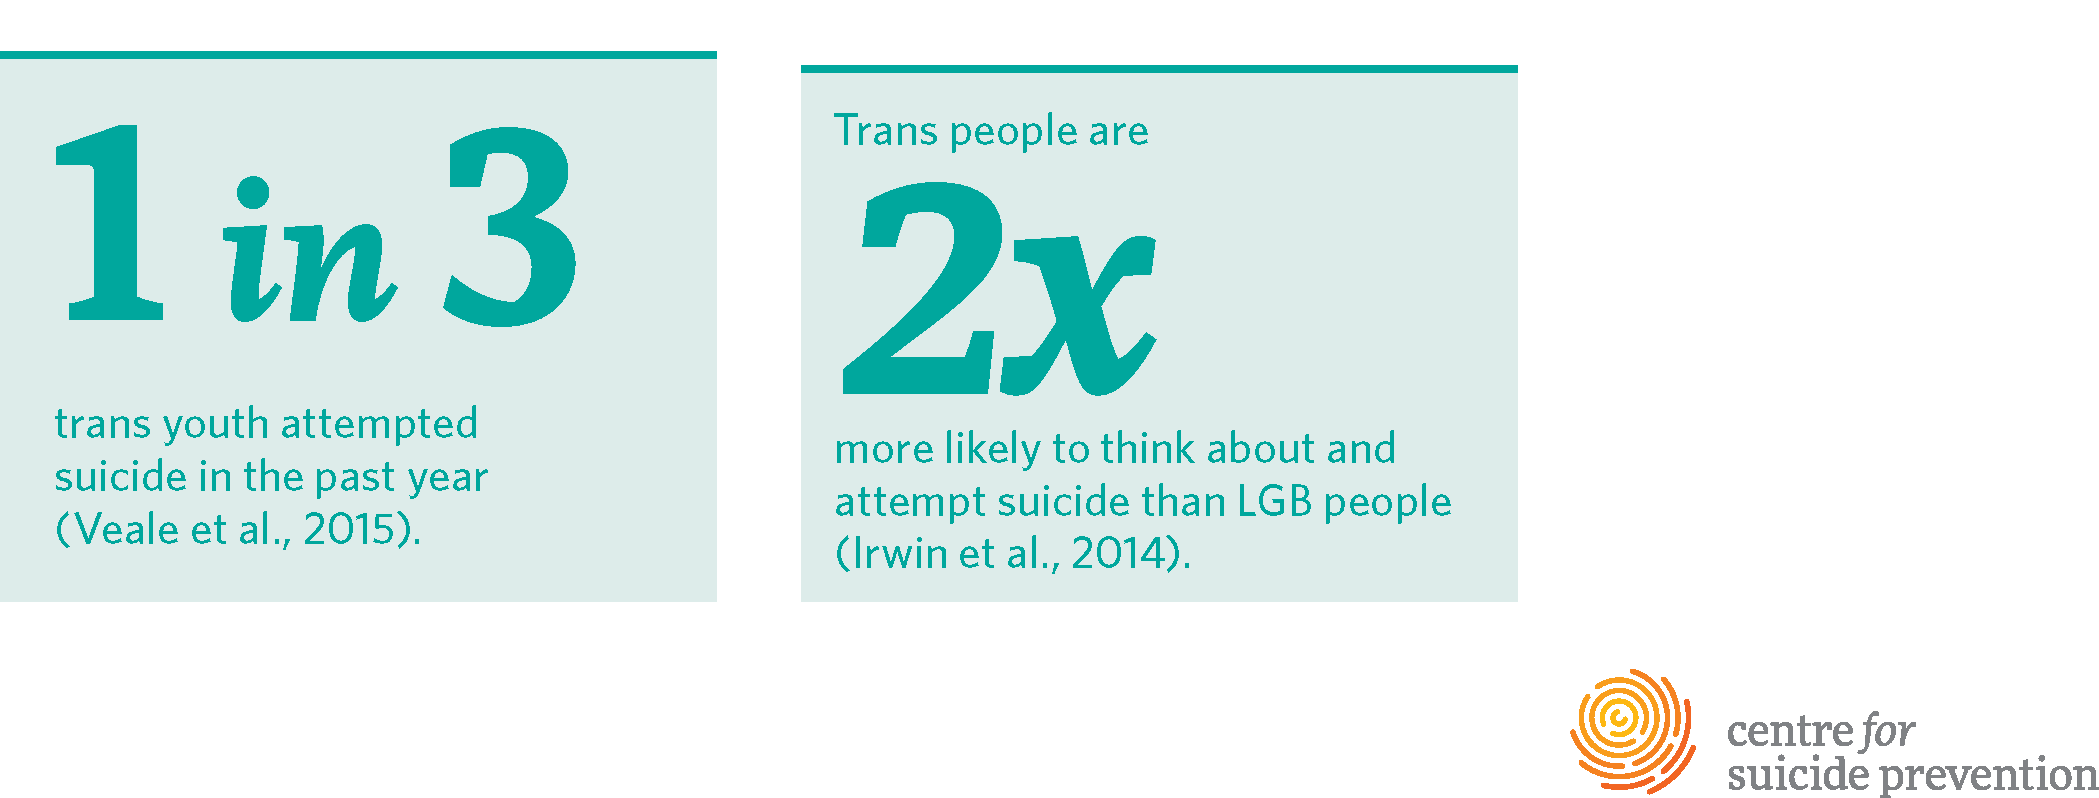 1 in 3 trans youth attempted suicide in the past year (Veale, 2015). Trans people are 2 times more likely to think about and attempt suicide than LGB people (Irwin et al., 2014). 67% of transitioning people thought about suicide pre-transition and only 3% post-medical transition (Bailey et al., 2014).